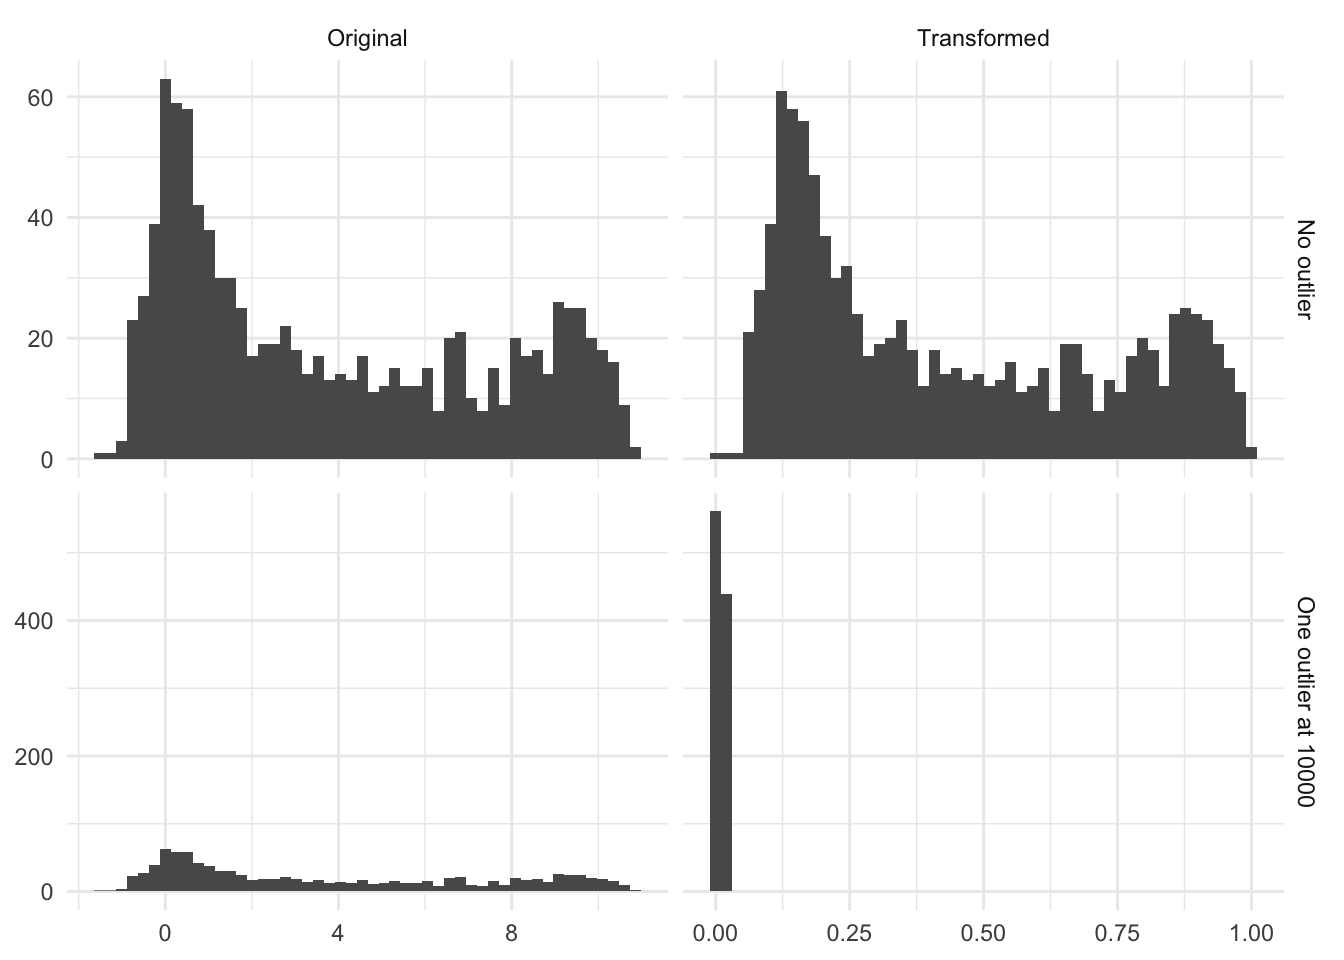 4 histograms of distribution in 2 columns. The left distribution shows the same bimodal distribution. To the left are the same distributions after being normalized. The bottom row shows the effect of having one outlier at 10000, which in this case made the transformed distribution has almost no width.